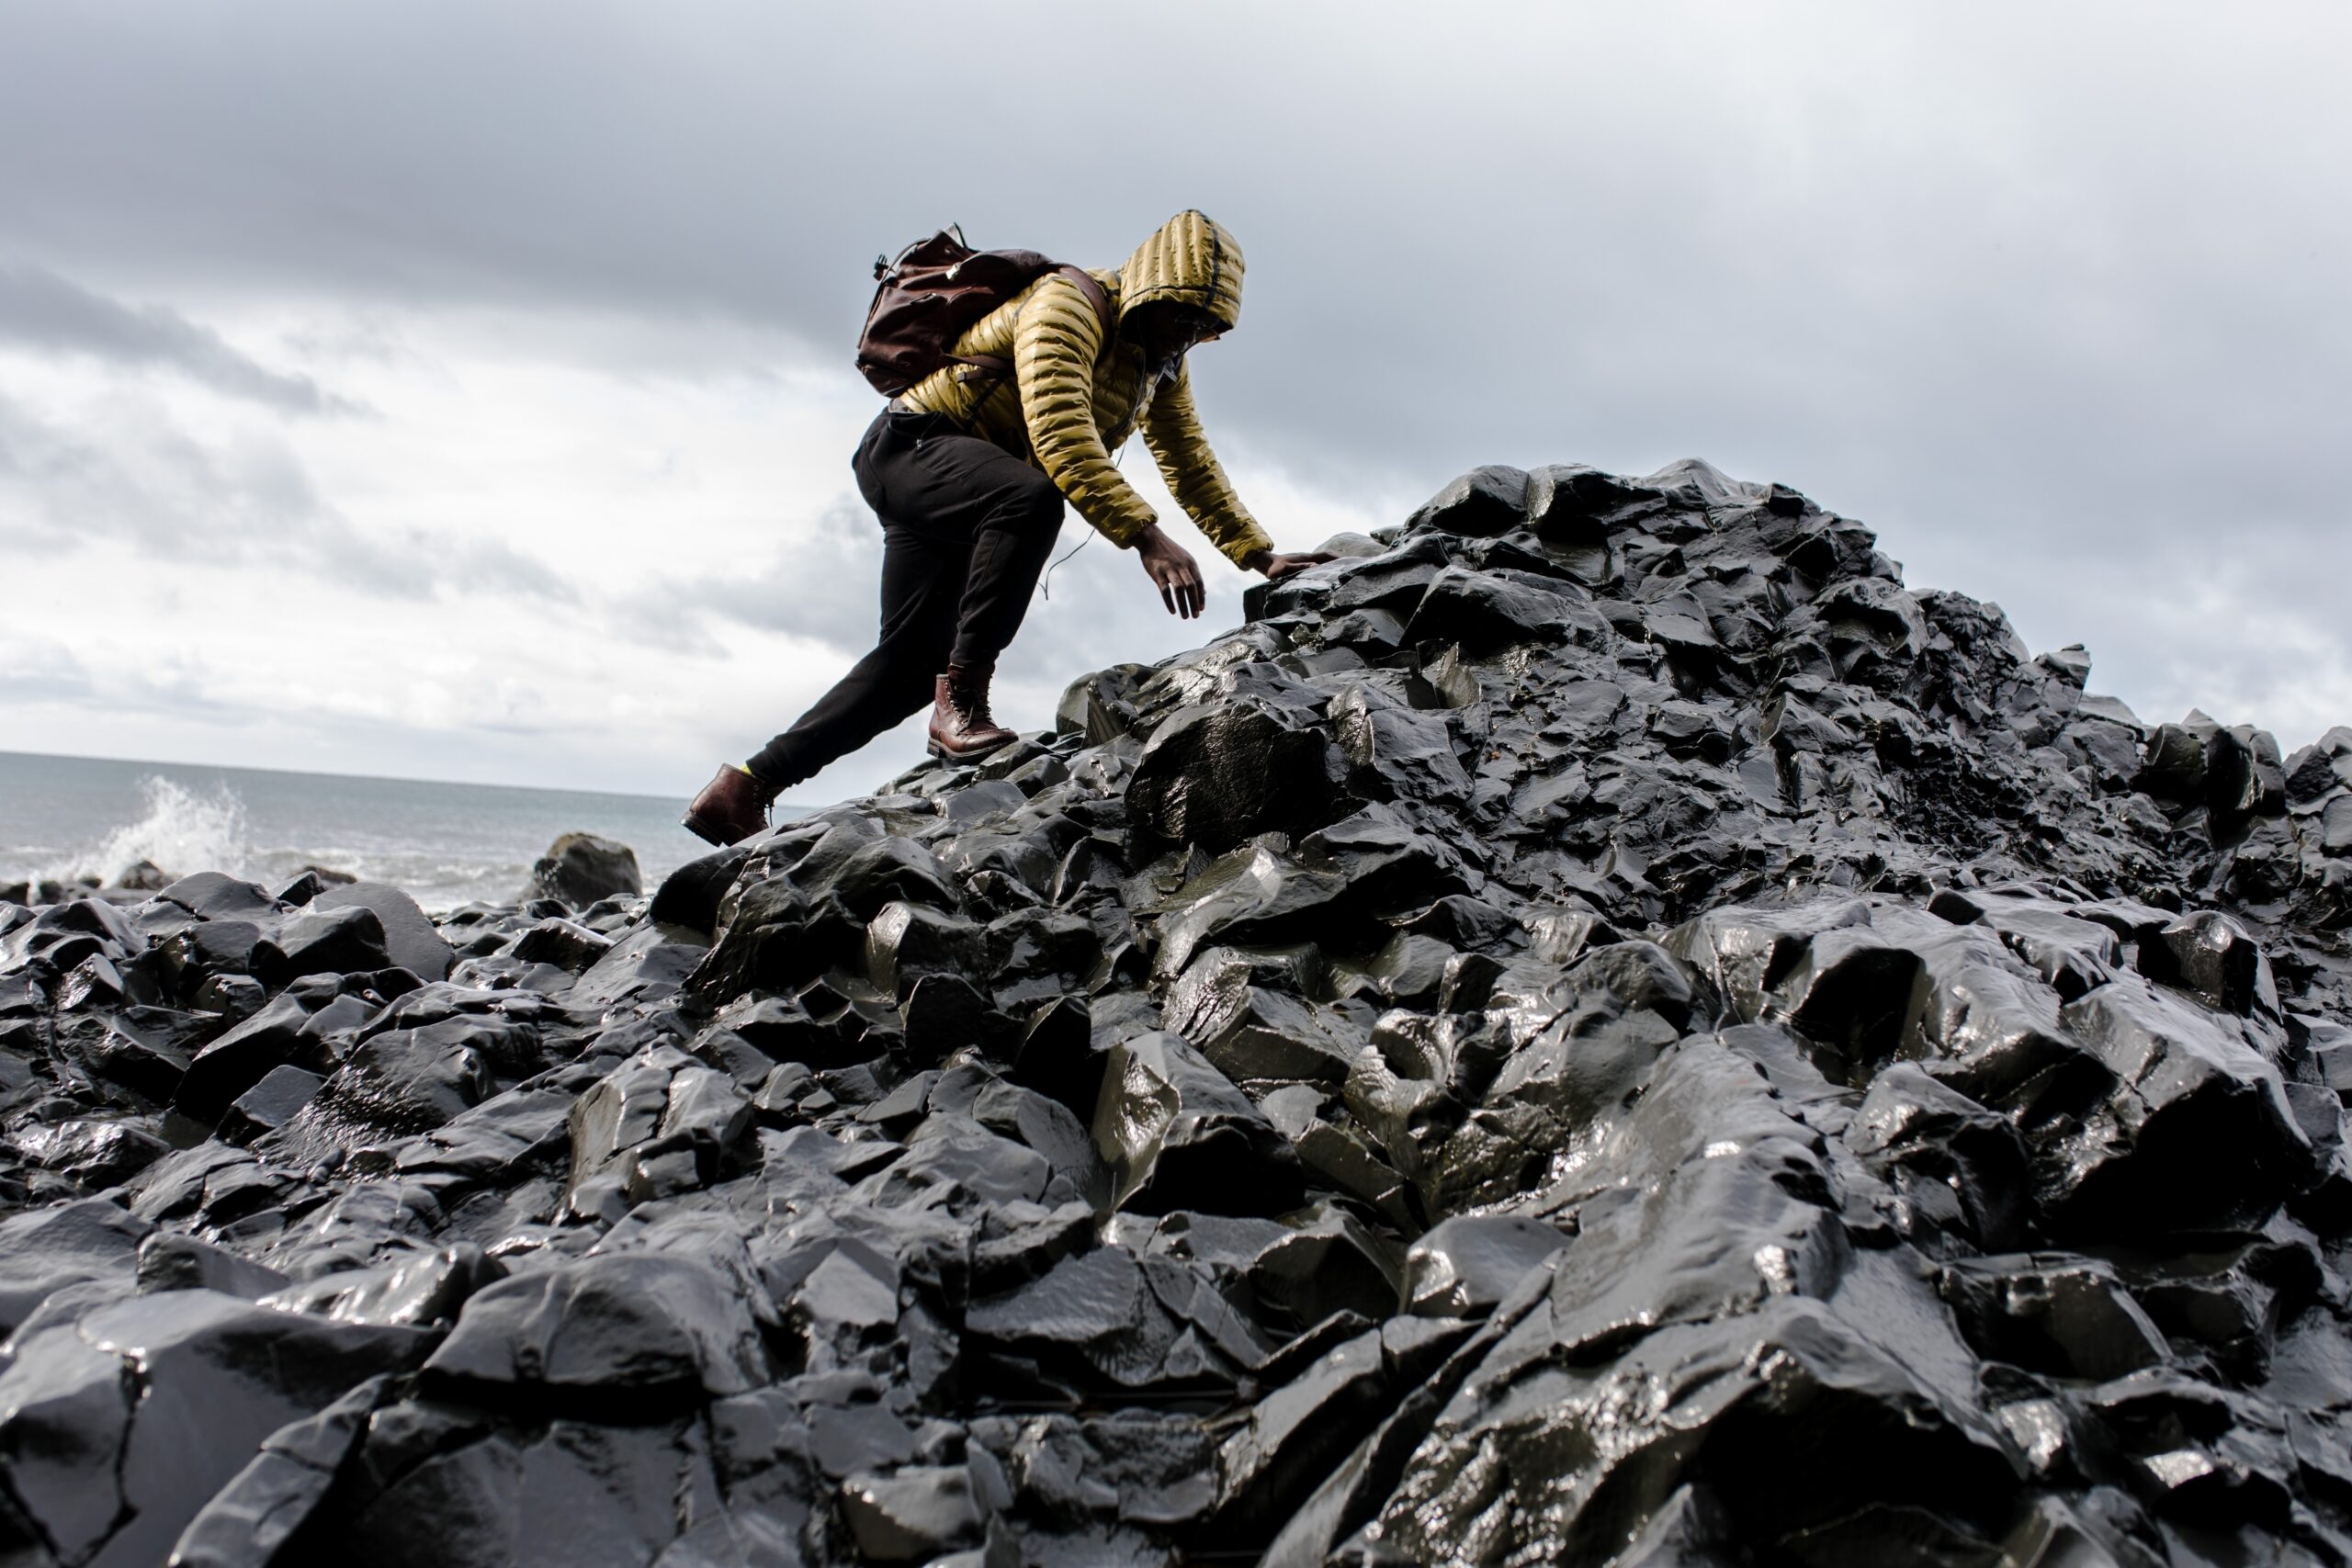 Man in yellow hiking jacket and black trousers scrambles up large pile of rocks